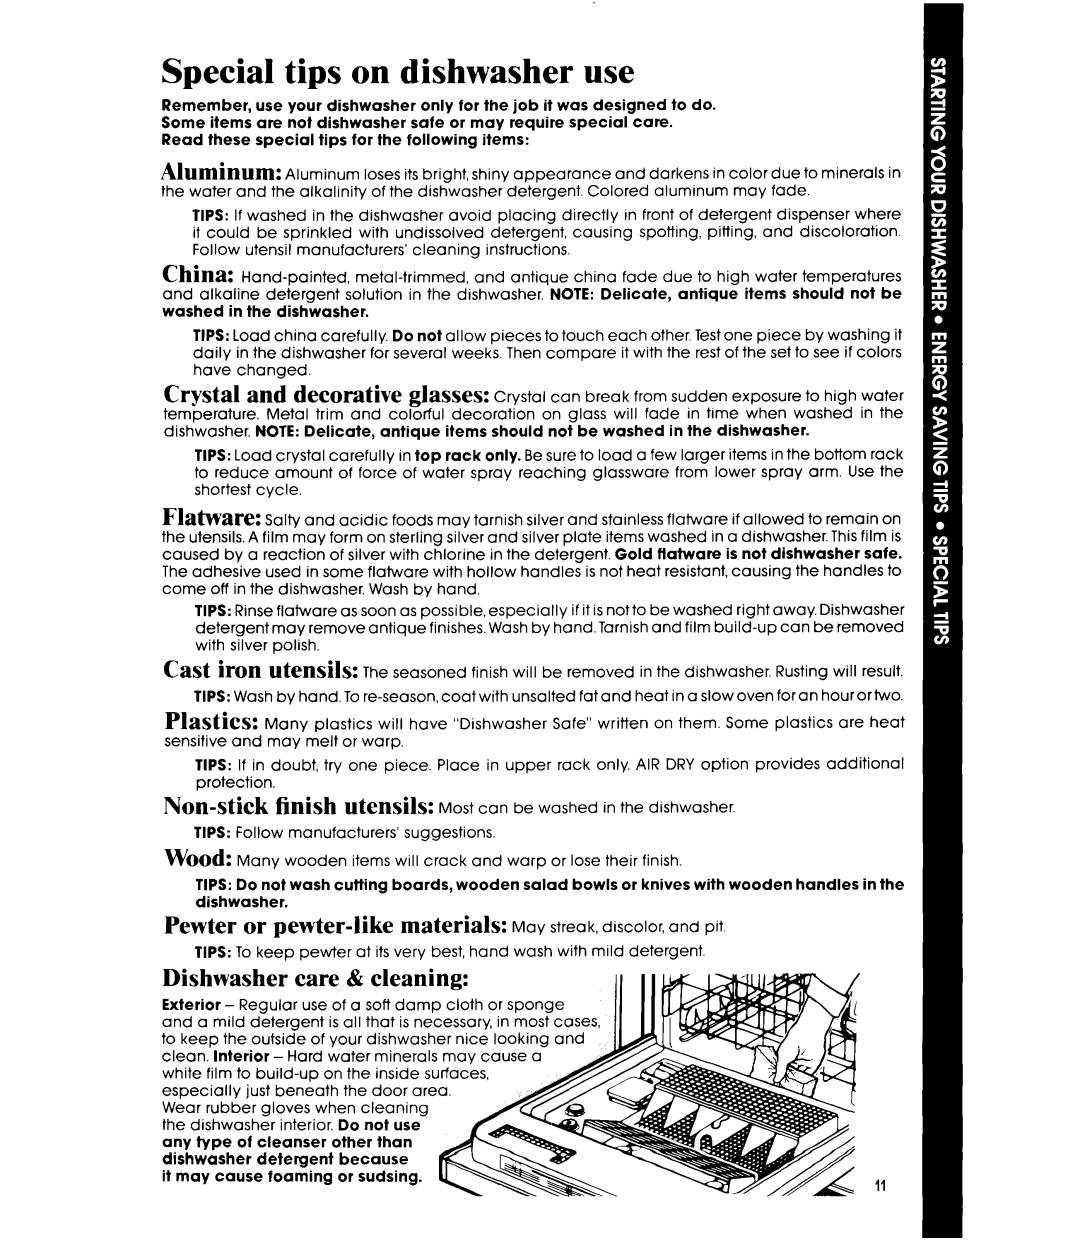 Whirlpool DU8900XT manual Special tips on dishwasher use, Dishwasher care & cleaning, Cast, iron, UtenSilS 